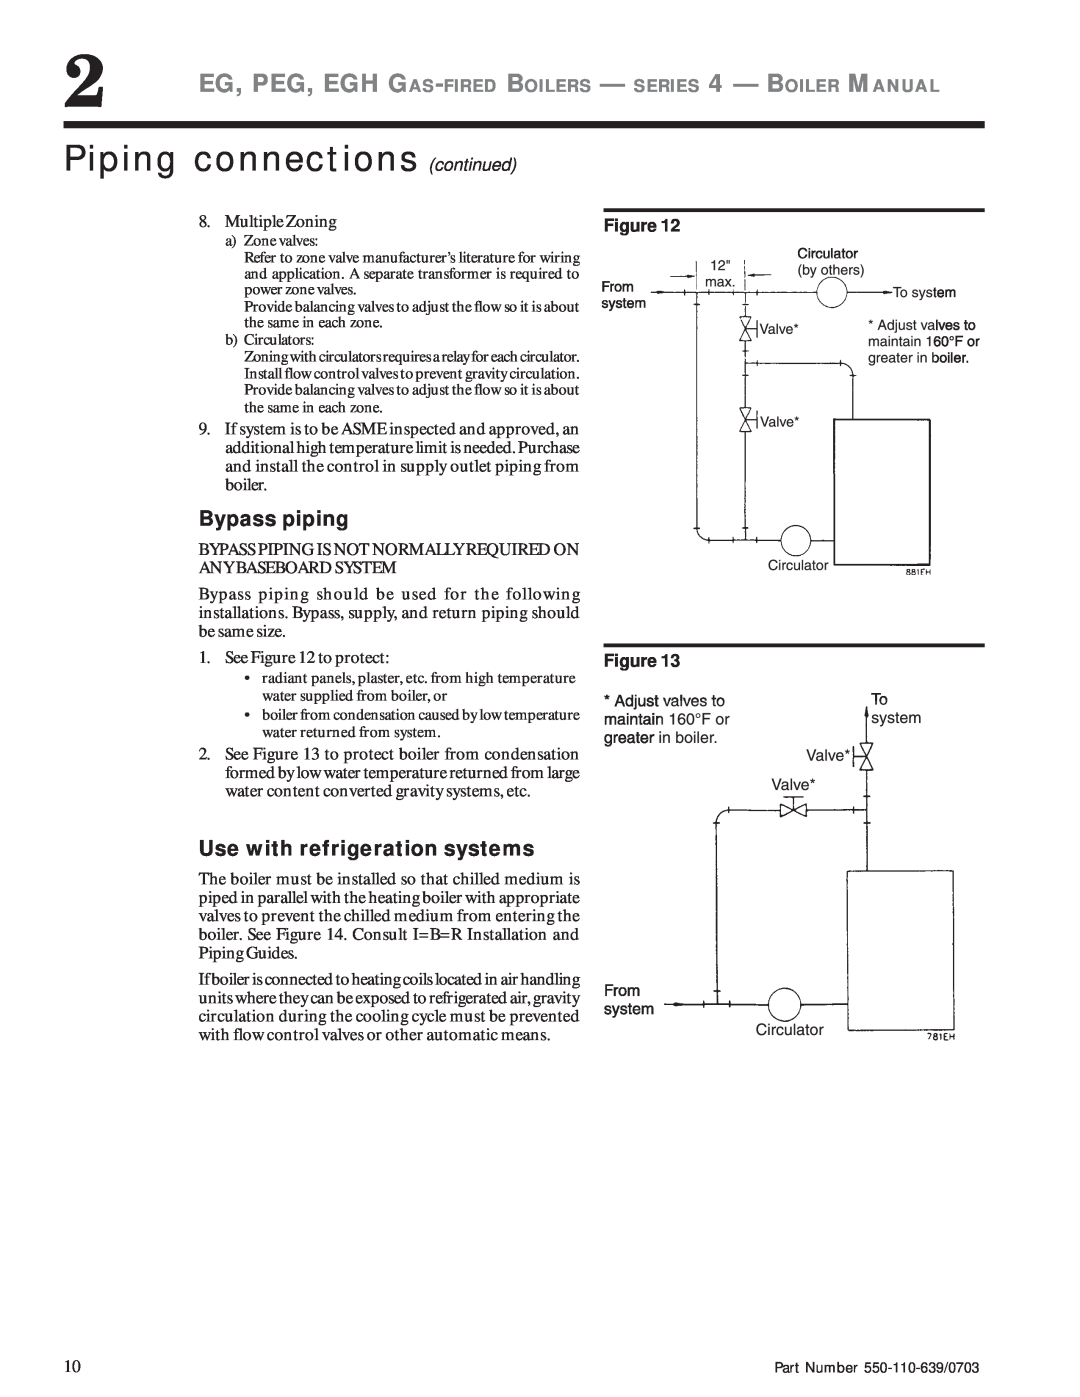 Weil-McLain EG manual Piping connections continued, Bypass piping, Use with refrigeration systems, Figure Figure 